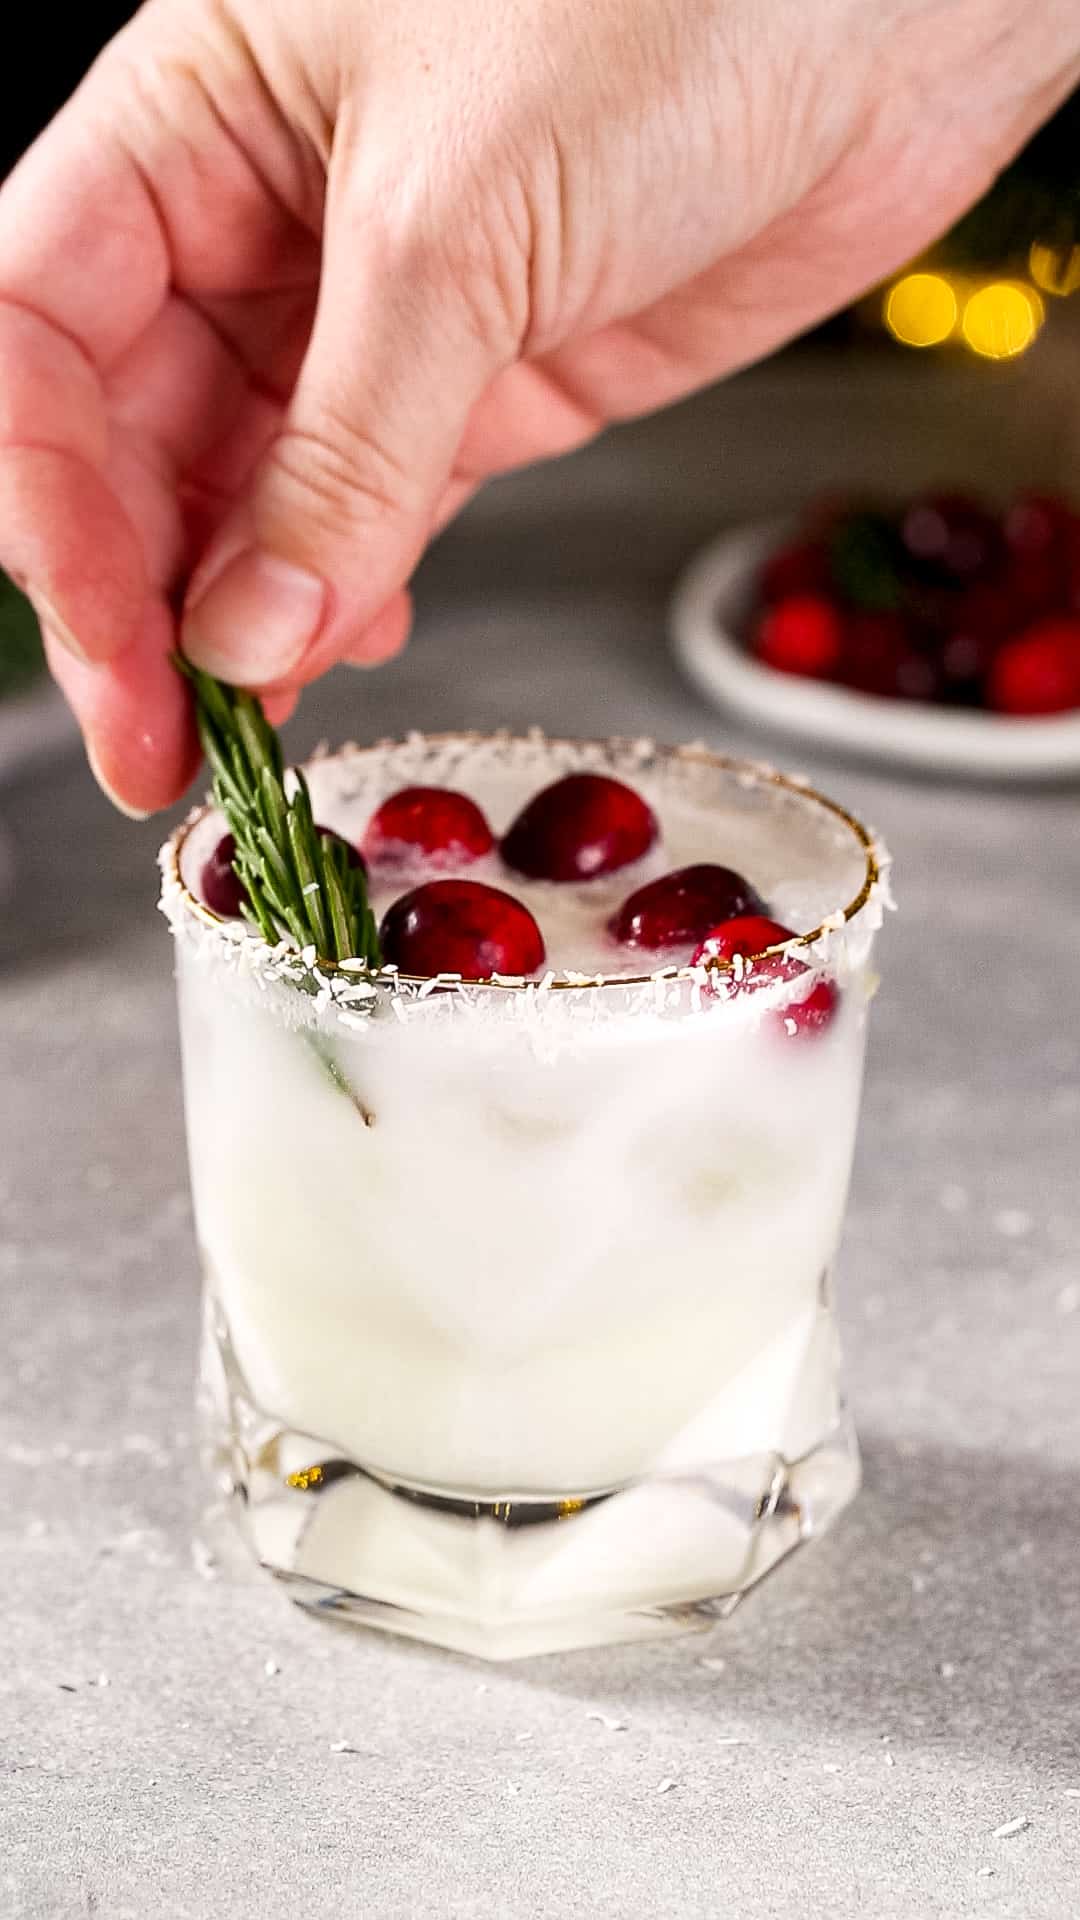 Hand adding a sprig of rosemary to a white drink in an old fashioned glass.